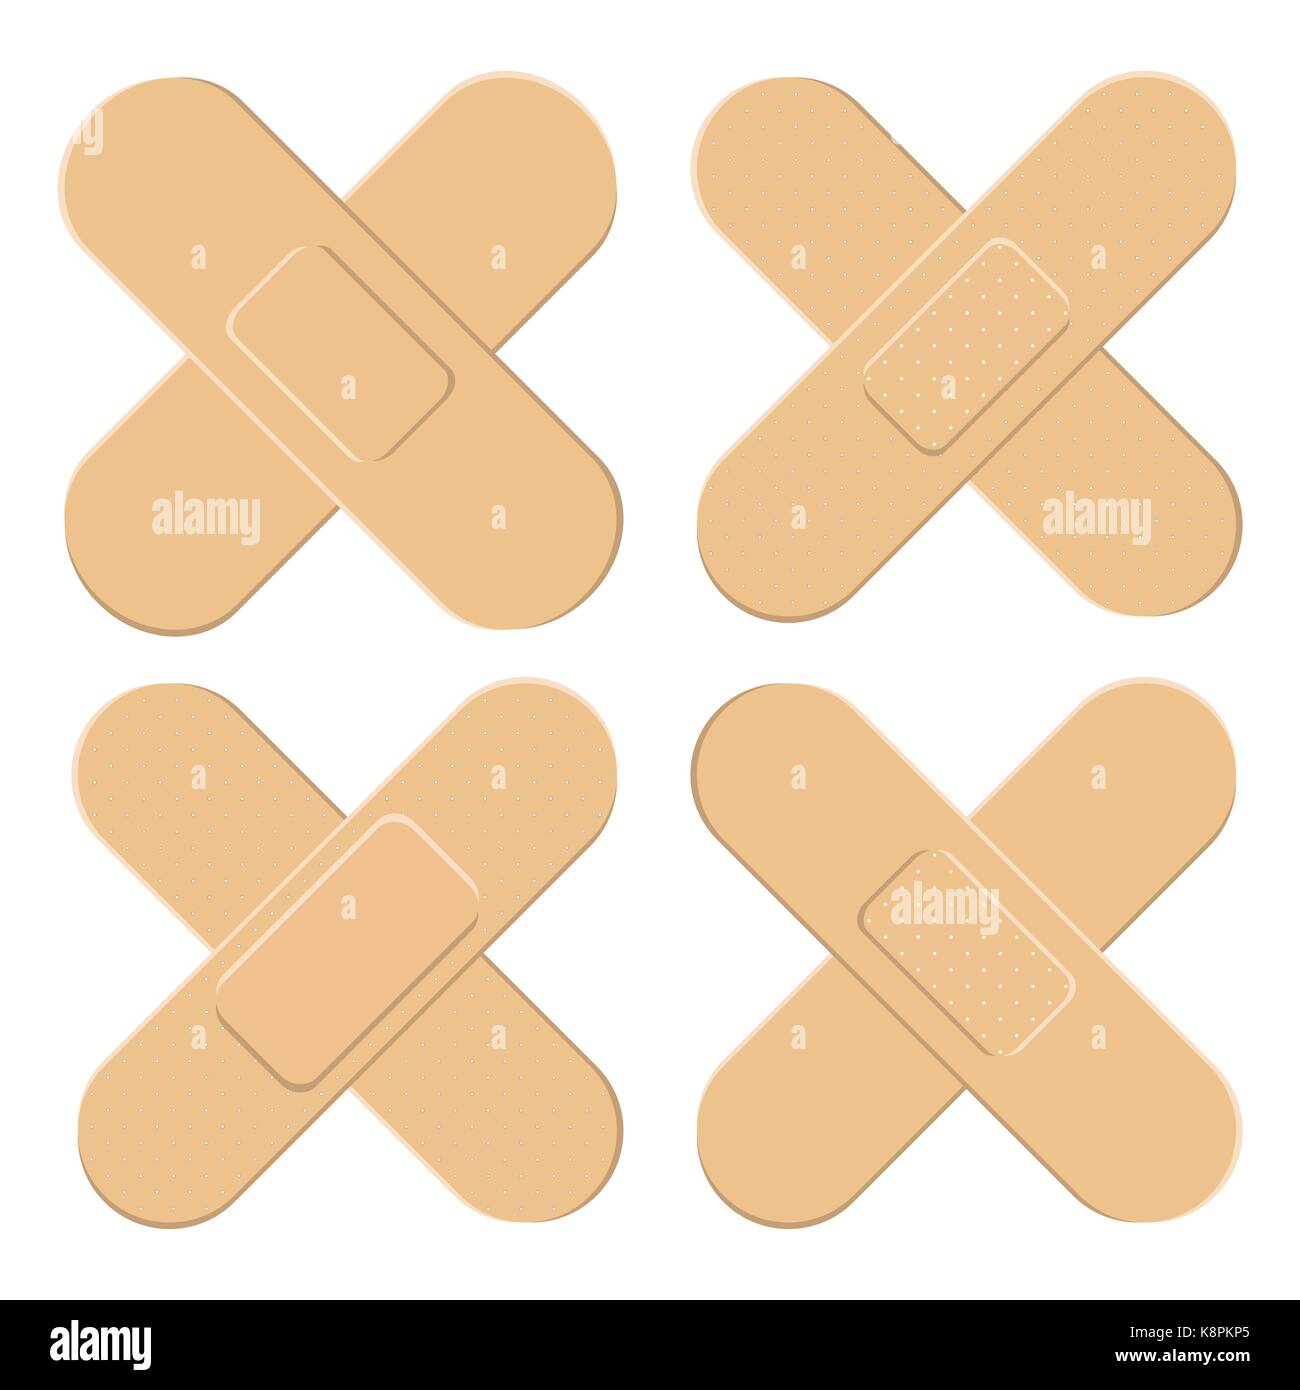 Set of Adhesive, flexible, fabric plaster . Medical bandage in different shape - straigh cross. Vector illustration isolated on white background. Stock Vector